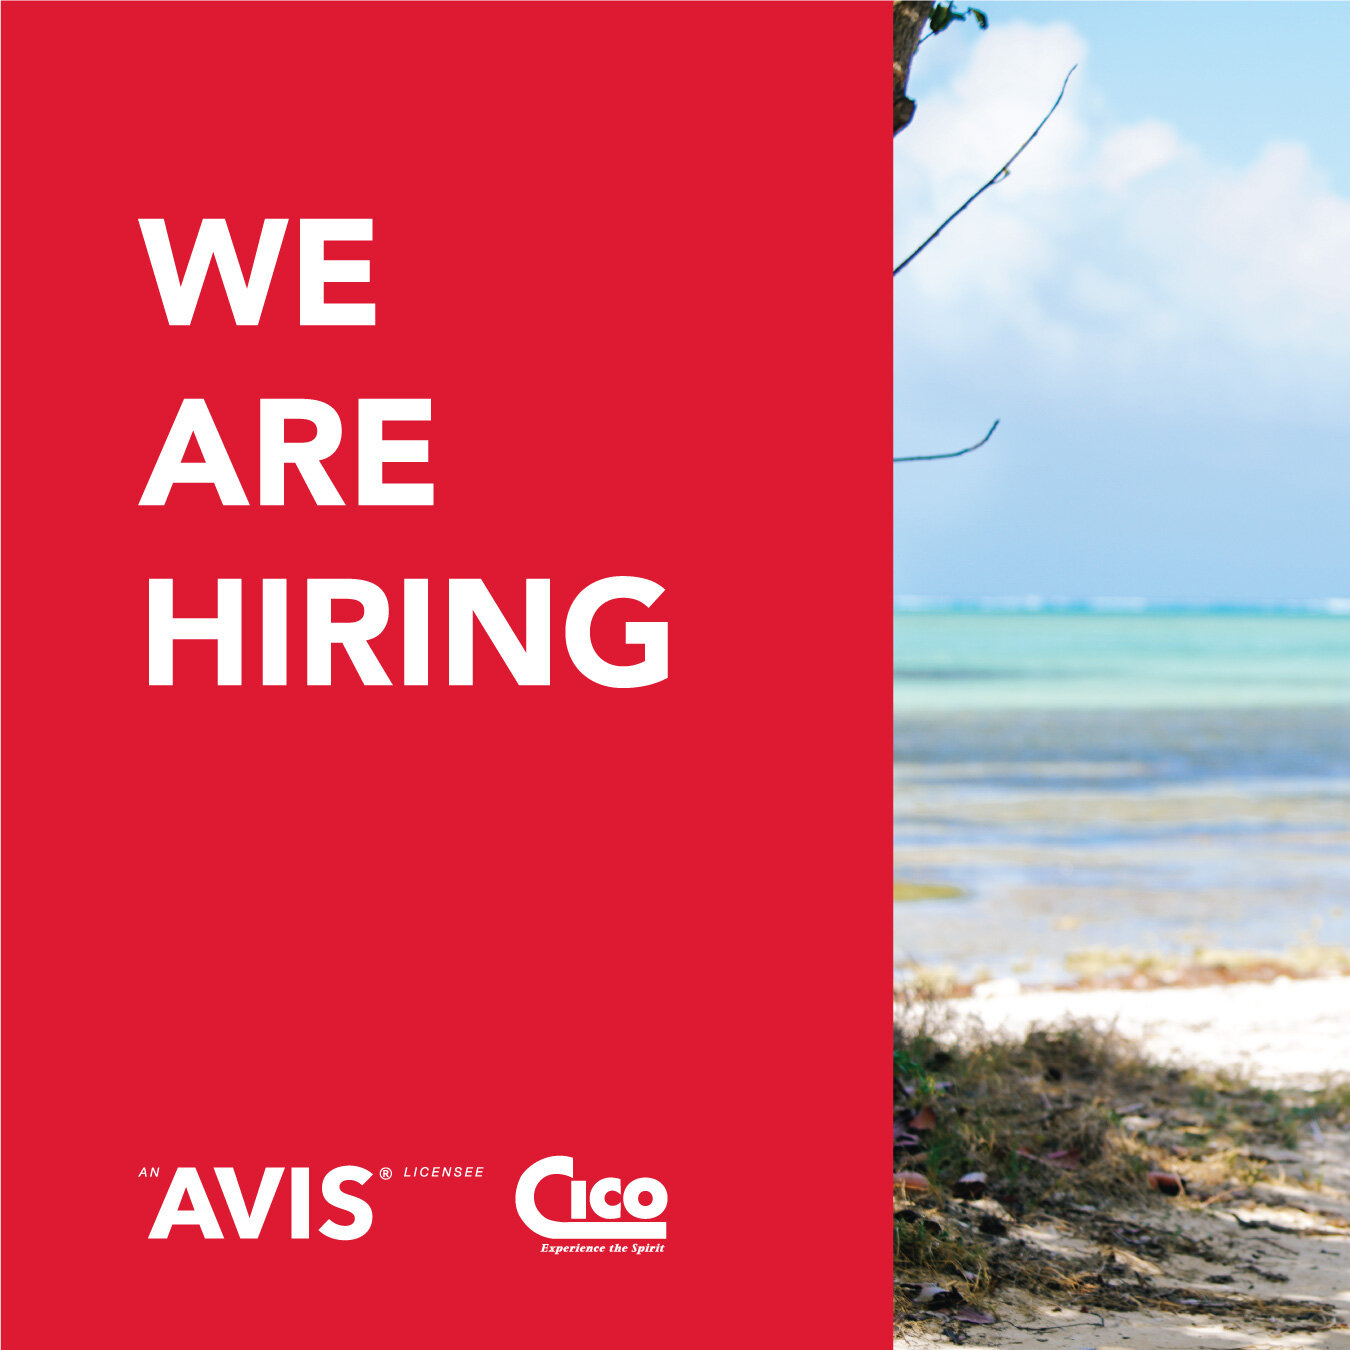 🔴 We're hiring!

If you&rsquo;re ready to become part of a dynamic team that values camaraderie and community, apply to join the Avis Cayman team, today!

For more information, head to the link in our bio ⬆️

#AvisCayman #Hiring